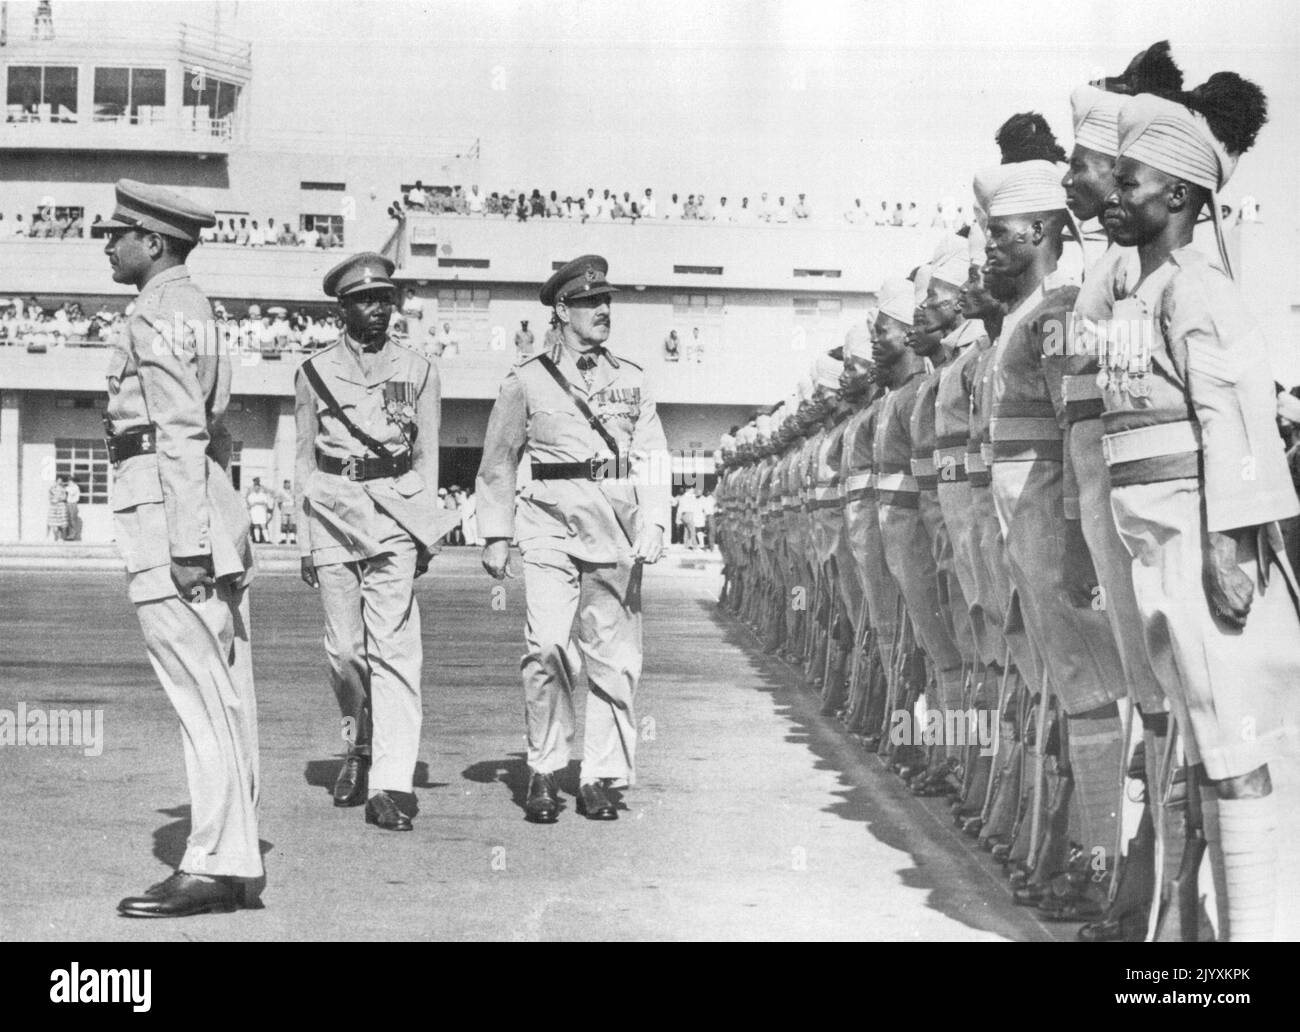 Sudan 'Goodbye' To Departing General -- Before his departure from Khartoum where he has been commanding British Forces Sudan and Commandant of the Sudan Defence Force, Major-General R.L. Scoones, C.B. D.S.O., O.B.E., inspecting the Sudan Defence Force Guard of honour. As part of the process transferring control of the Sudan to the new Sudan Government the post of Commanding Officer of all Sudanese and British troops in the Sudan has been 'Sudanised'. Friends and colleagues who came to Khartoum airport to wish Major-General Scoones goodbye can be seen in the background. He returned to the U. K. Stock Photo